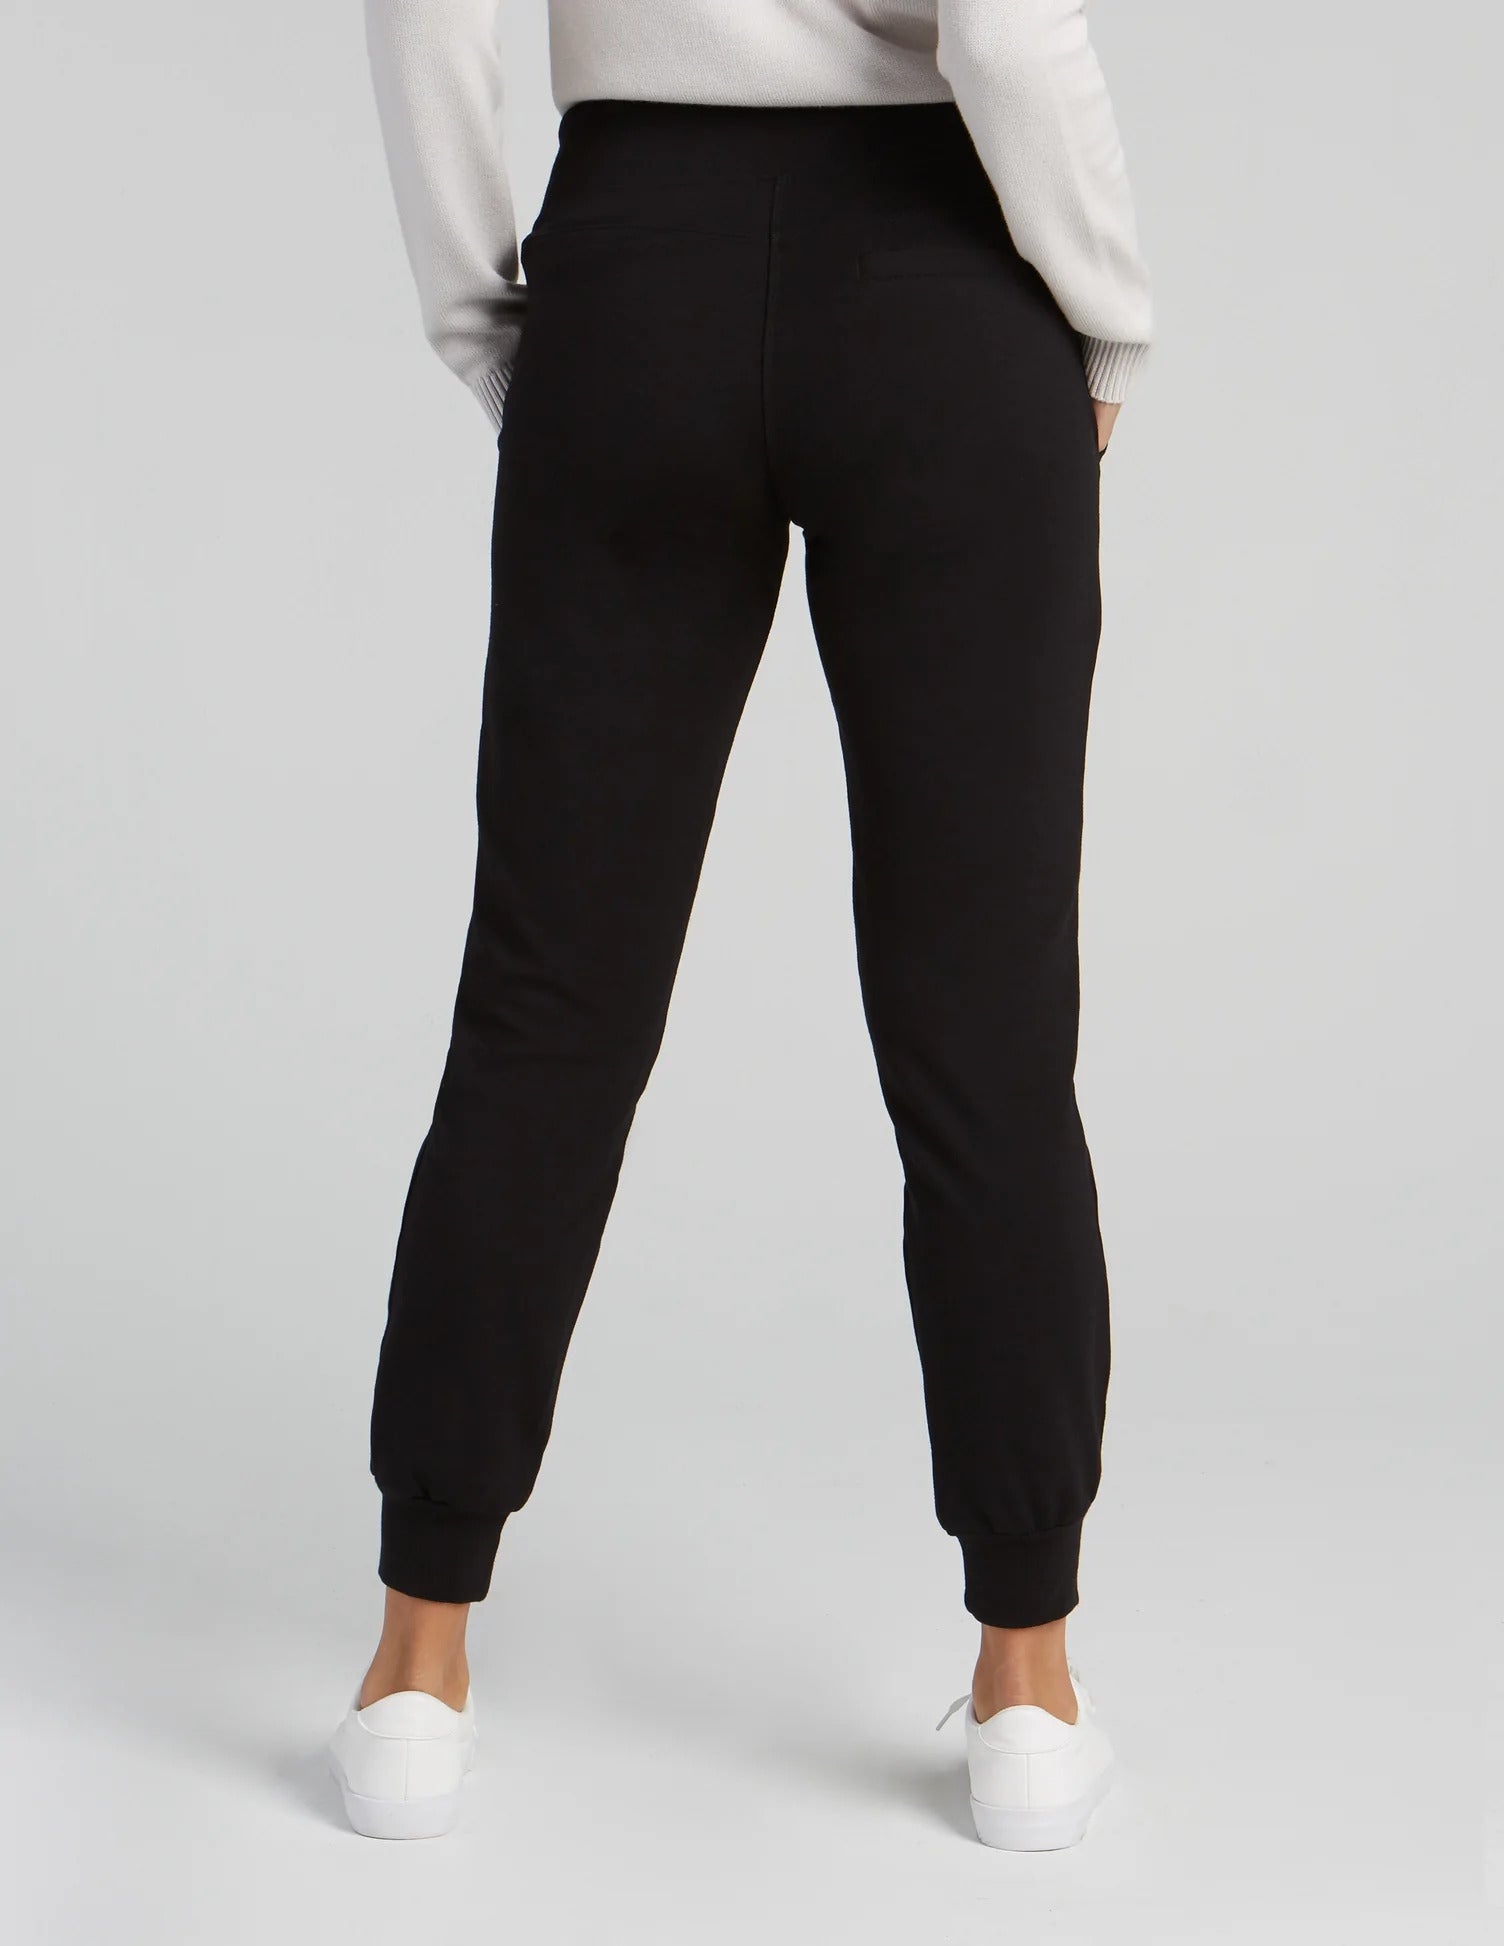 OTH Pants for Women